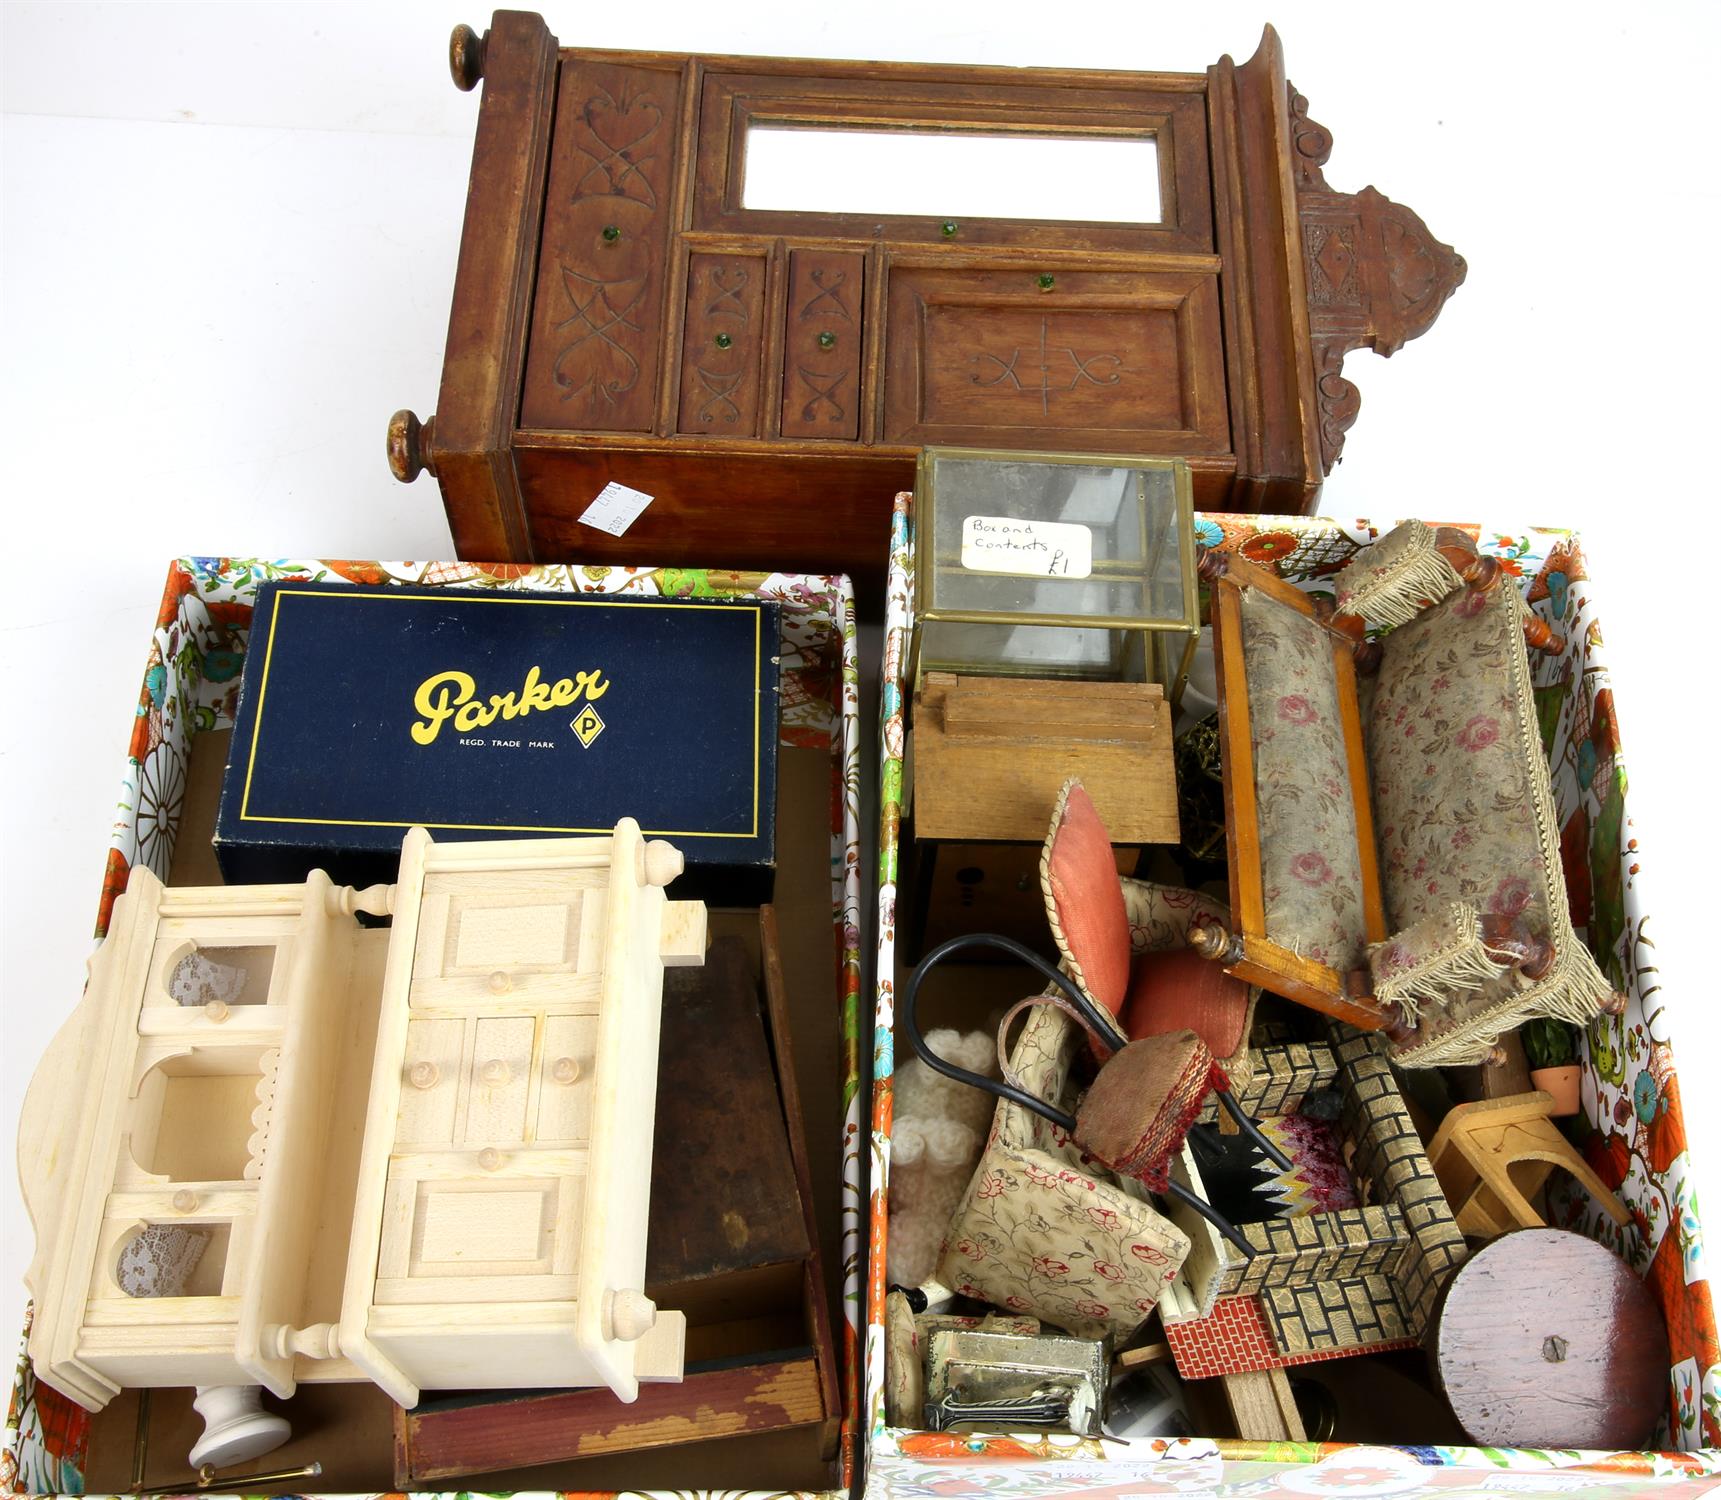 Dolls house furniture to include two grand pianos (one wooden, one plastic), tables, ornate bed, - Image 5 of 5